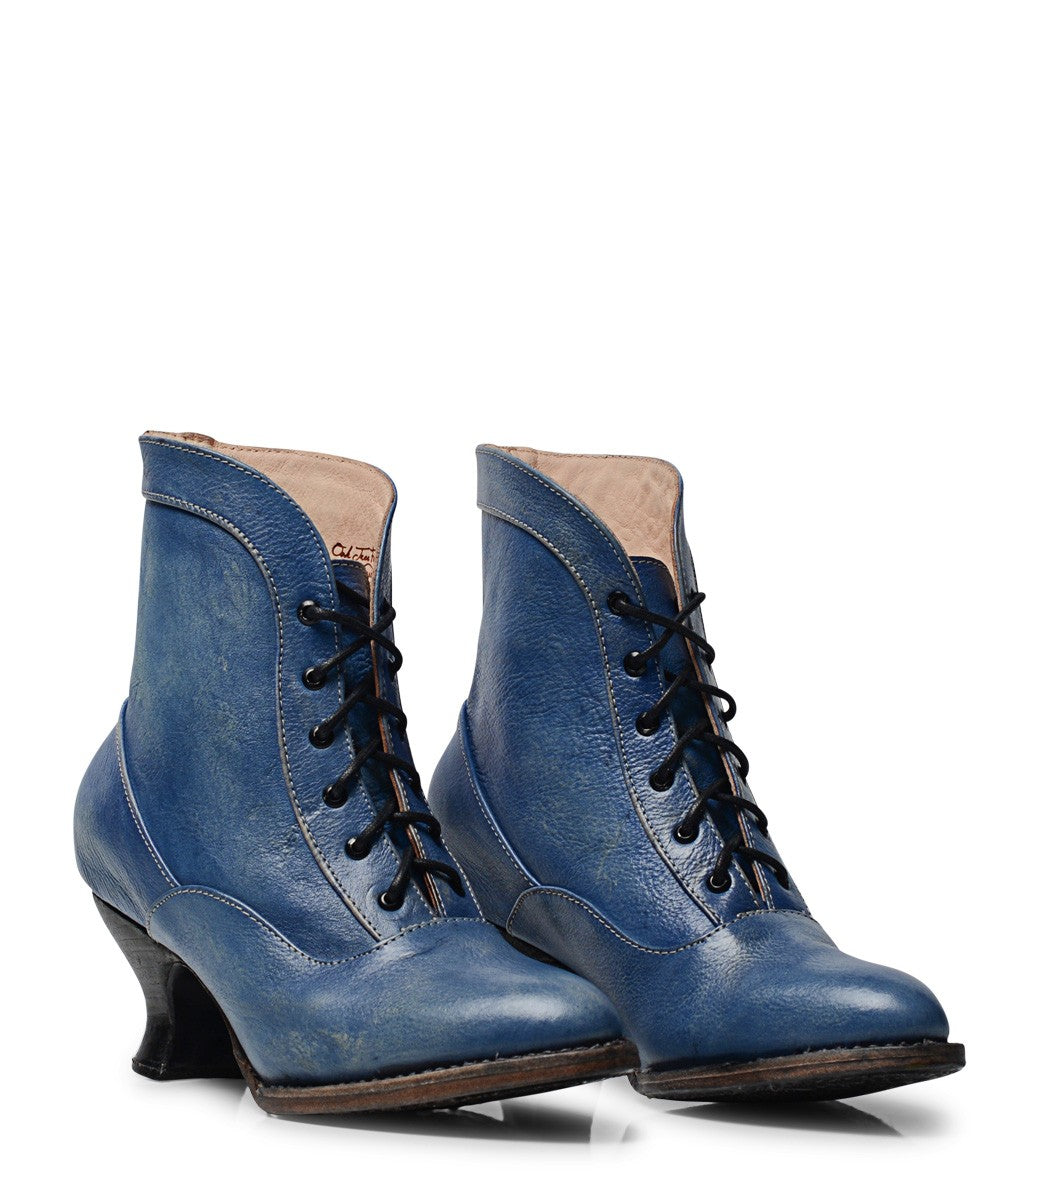 Vintage Style Victorian Lace Up Leather Boots in Steel Blue - SOLD OUT